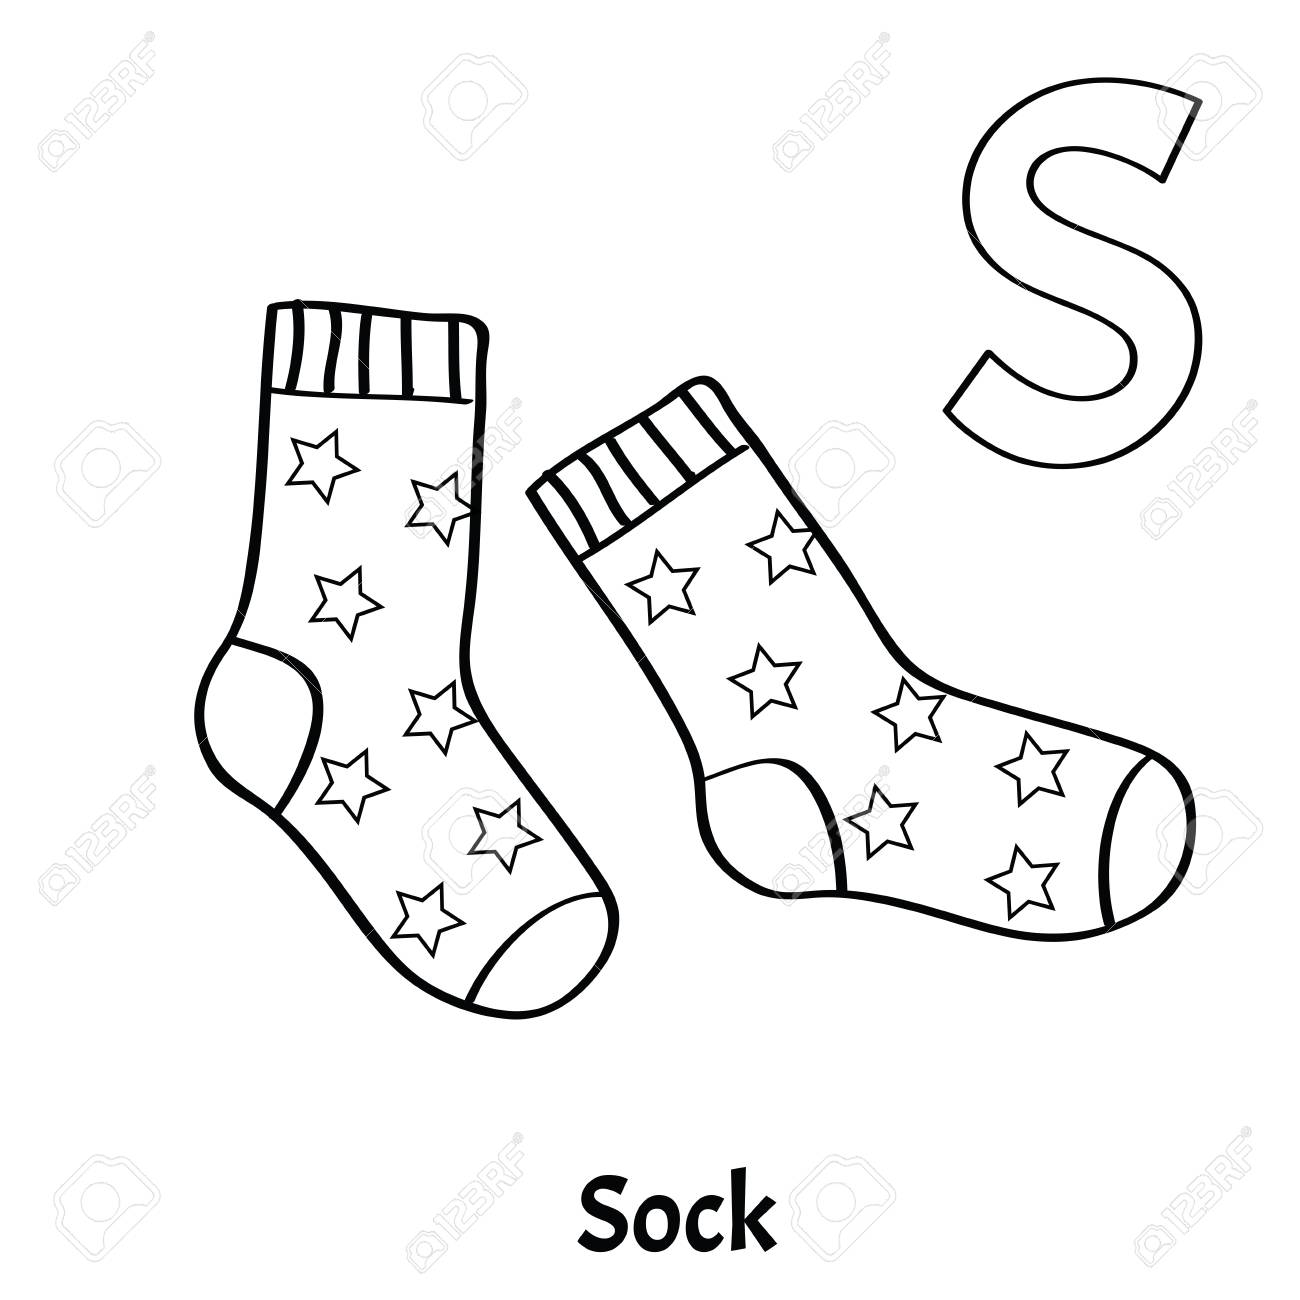 Vector alphabet letter s coloring page sock royalty free svg cliparts vectors and stock illustration image